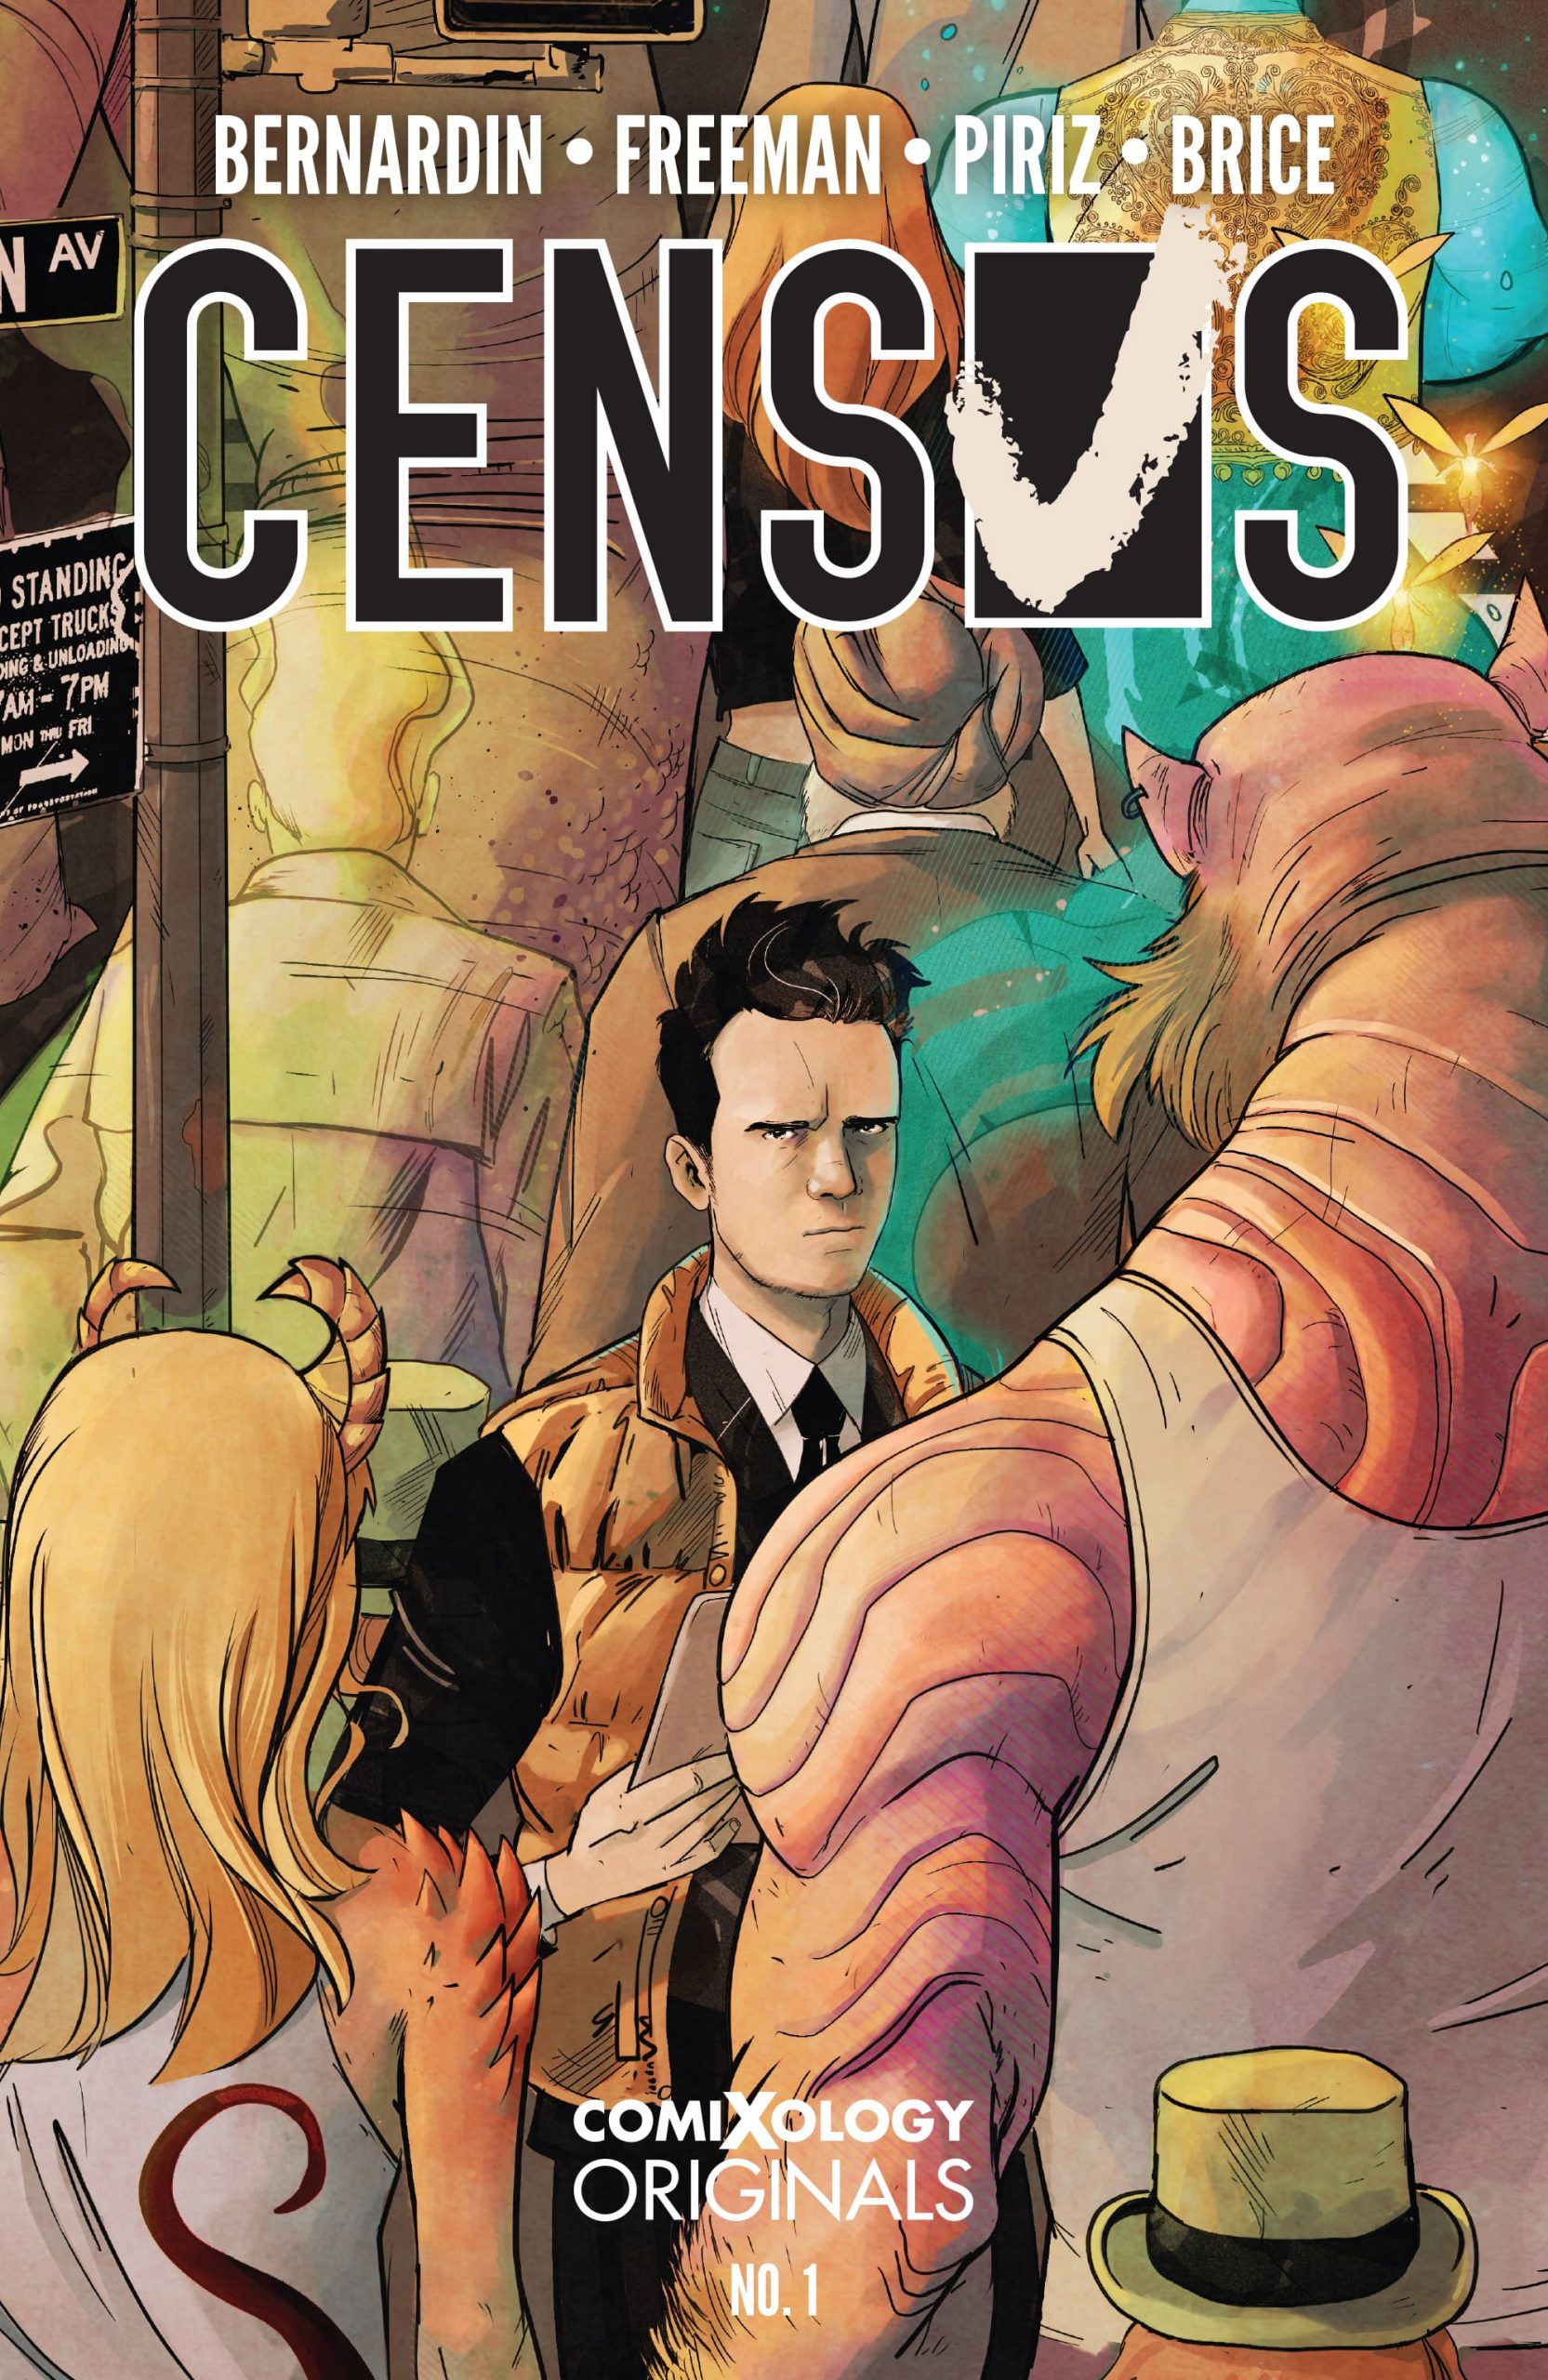 Comixology announces 5-issue horror comedy 'Census'